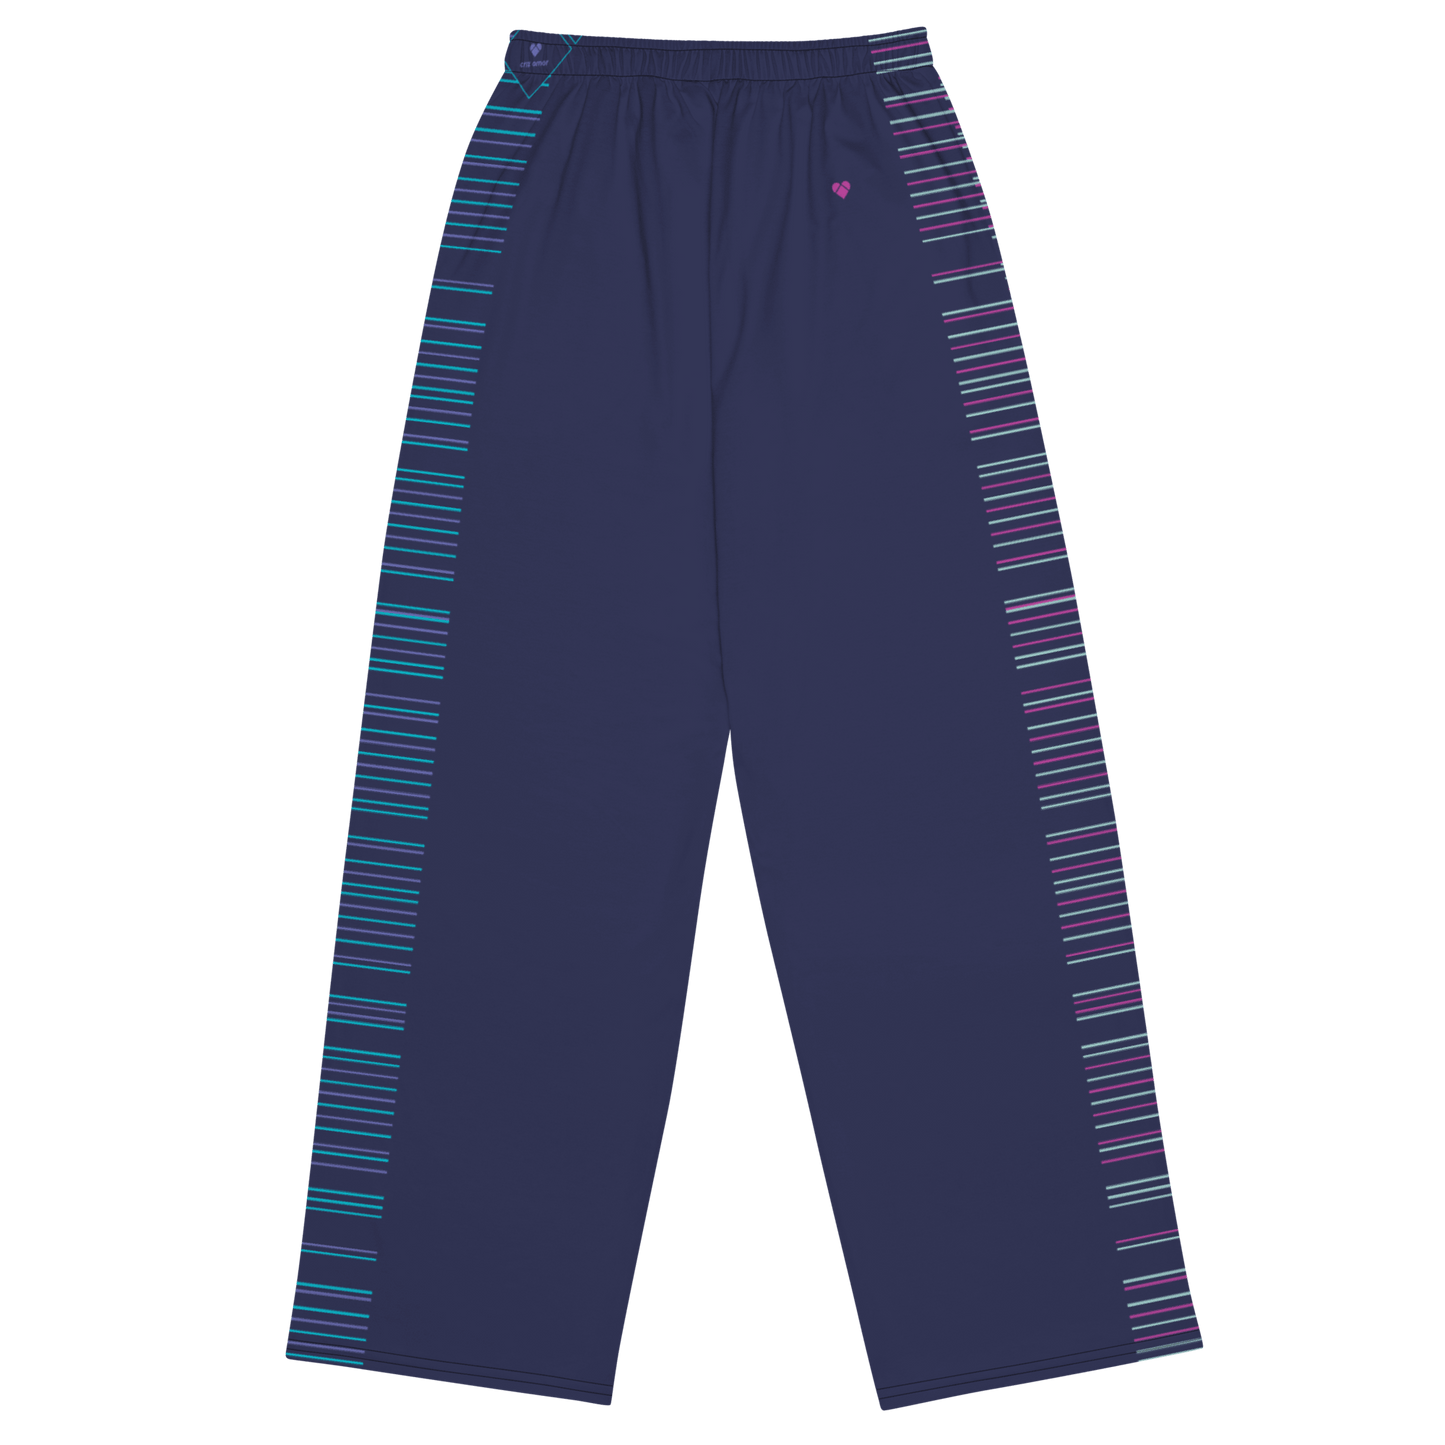 Dark Slate Blue Dual Pants with gradient stripes and heart logo